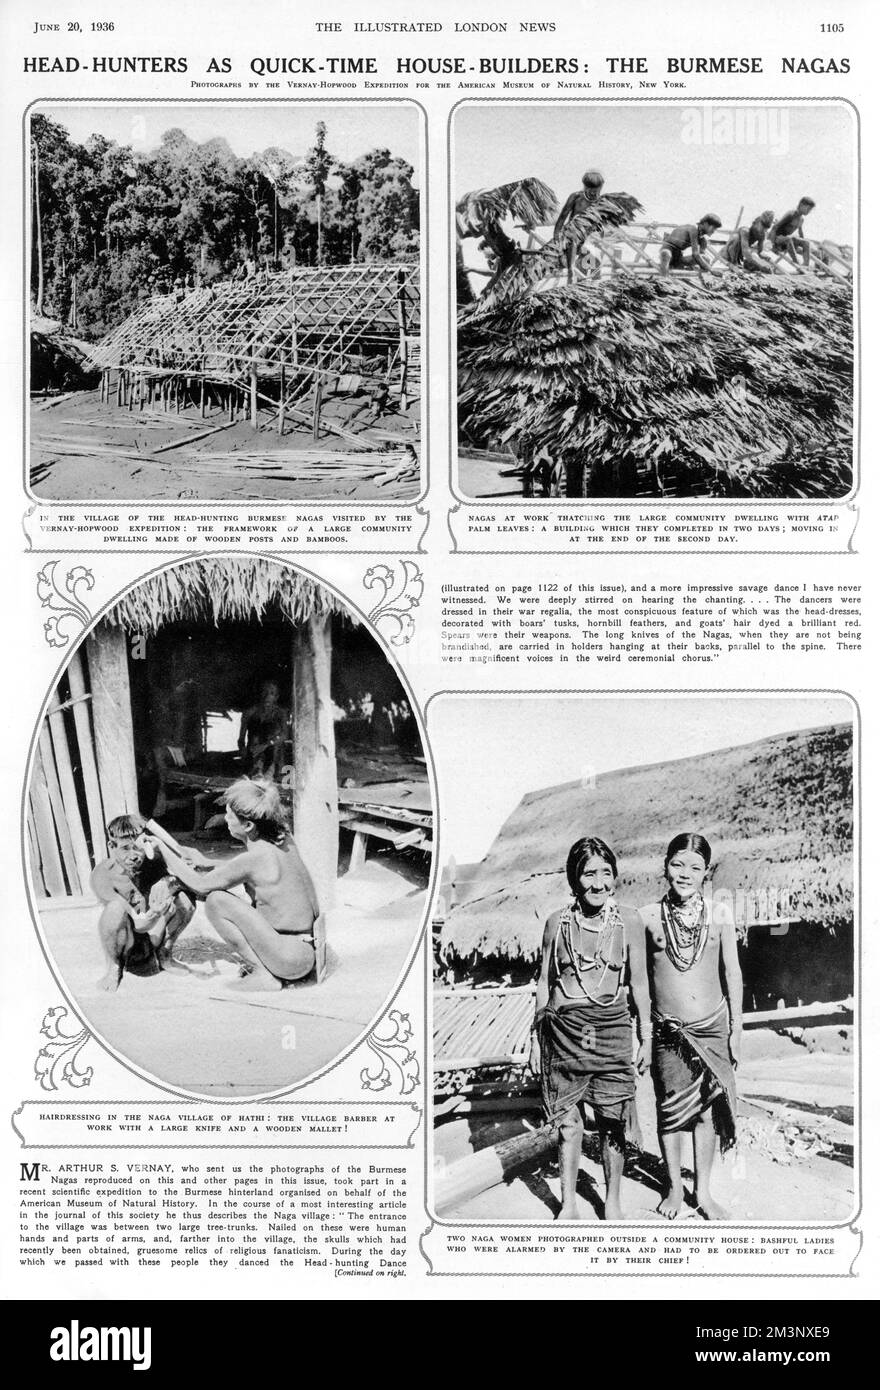 Mr A. S. Vernay visited a village of the head-hunting Burmese Nagas with the American Museum of Natural History expedition, taking the photographs that appear on this page which include, clockwise from top left: In the village of the head-hunting Burmese Nagas, the large framework of a large community dwelling made of wooden posts and bamboo; Nagas at work thatching the large community dwelling with atap palm leaves; Two Naga women photographed outside a community house- bashful ladies who were alarmed by the camera and had to be ordered out to face it by their chief;  and hairdressing in the Stock Photo